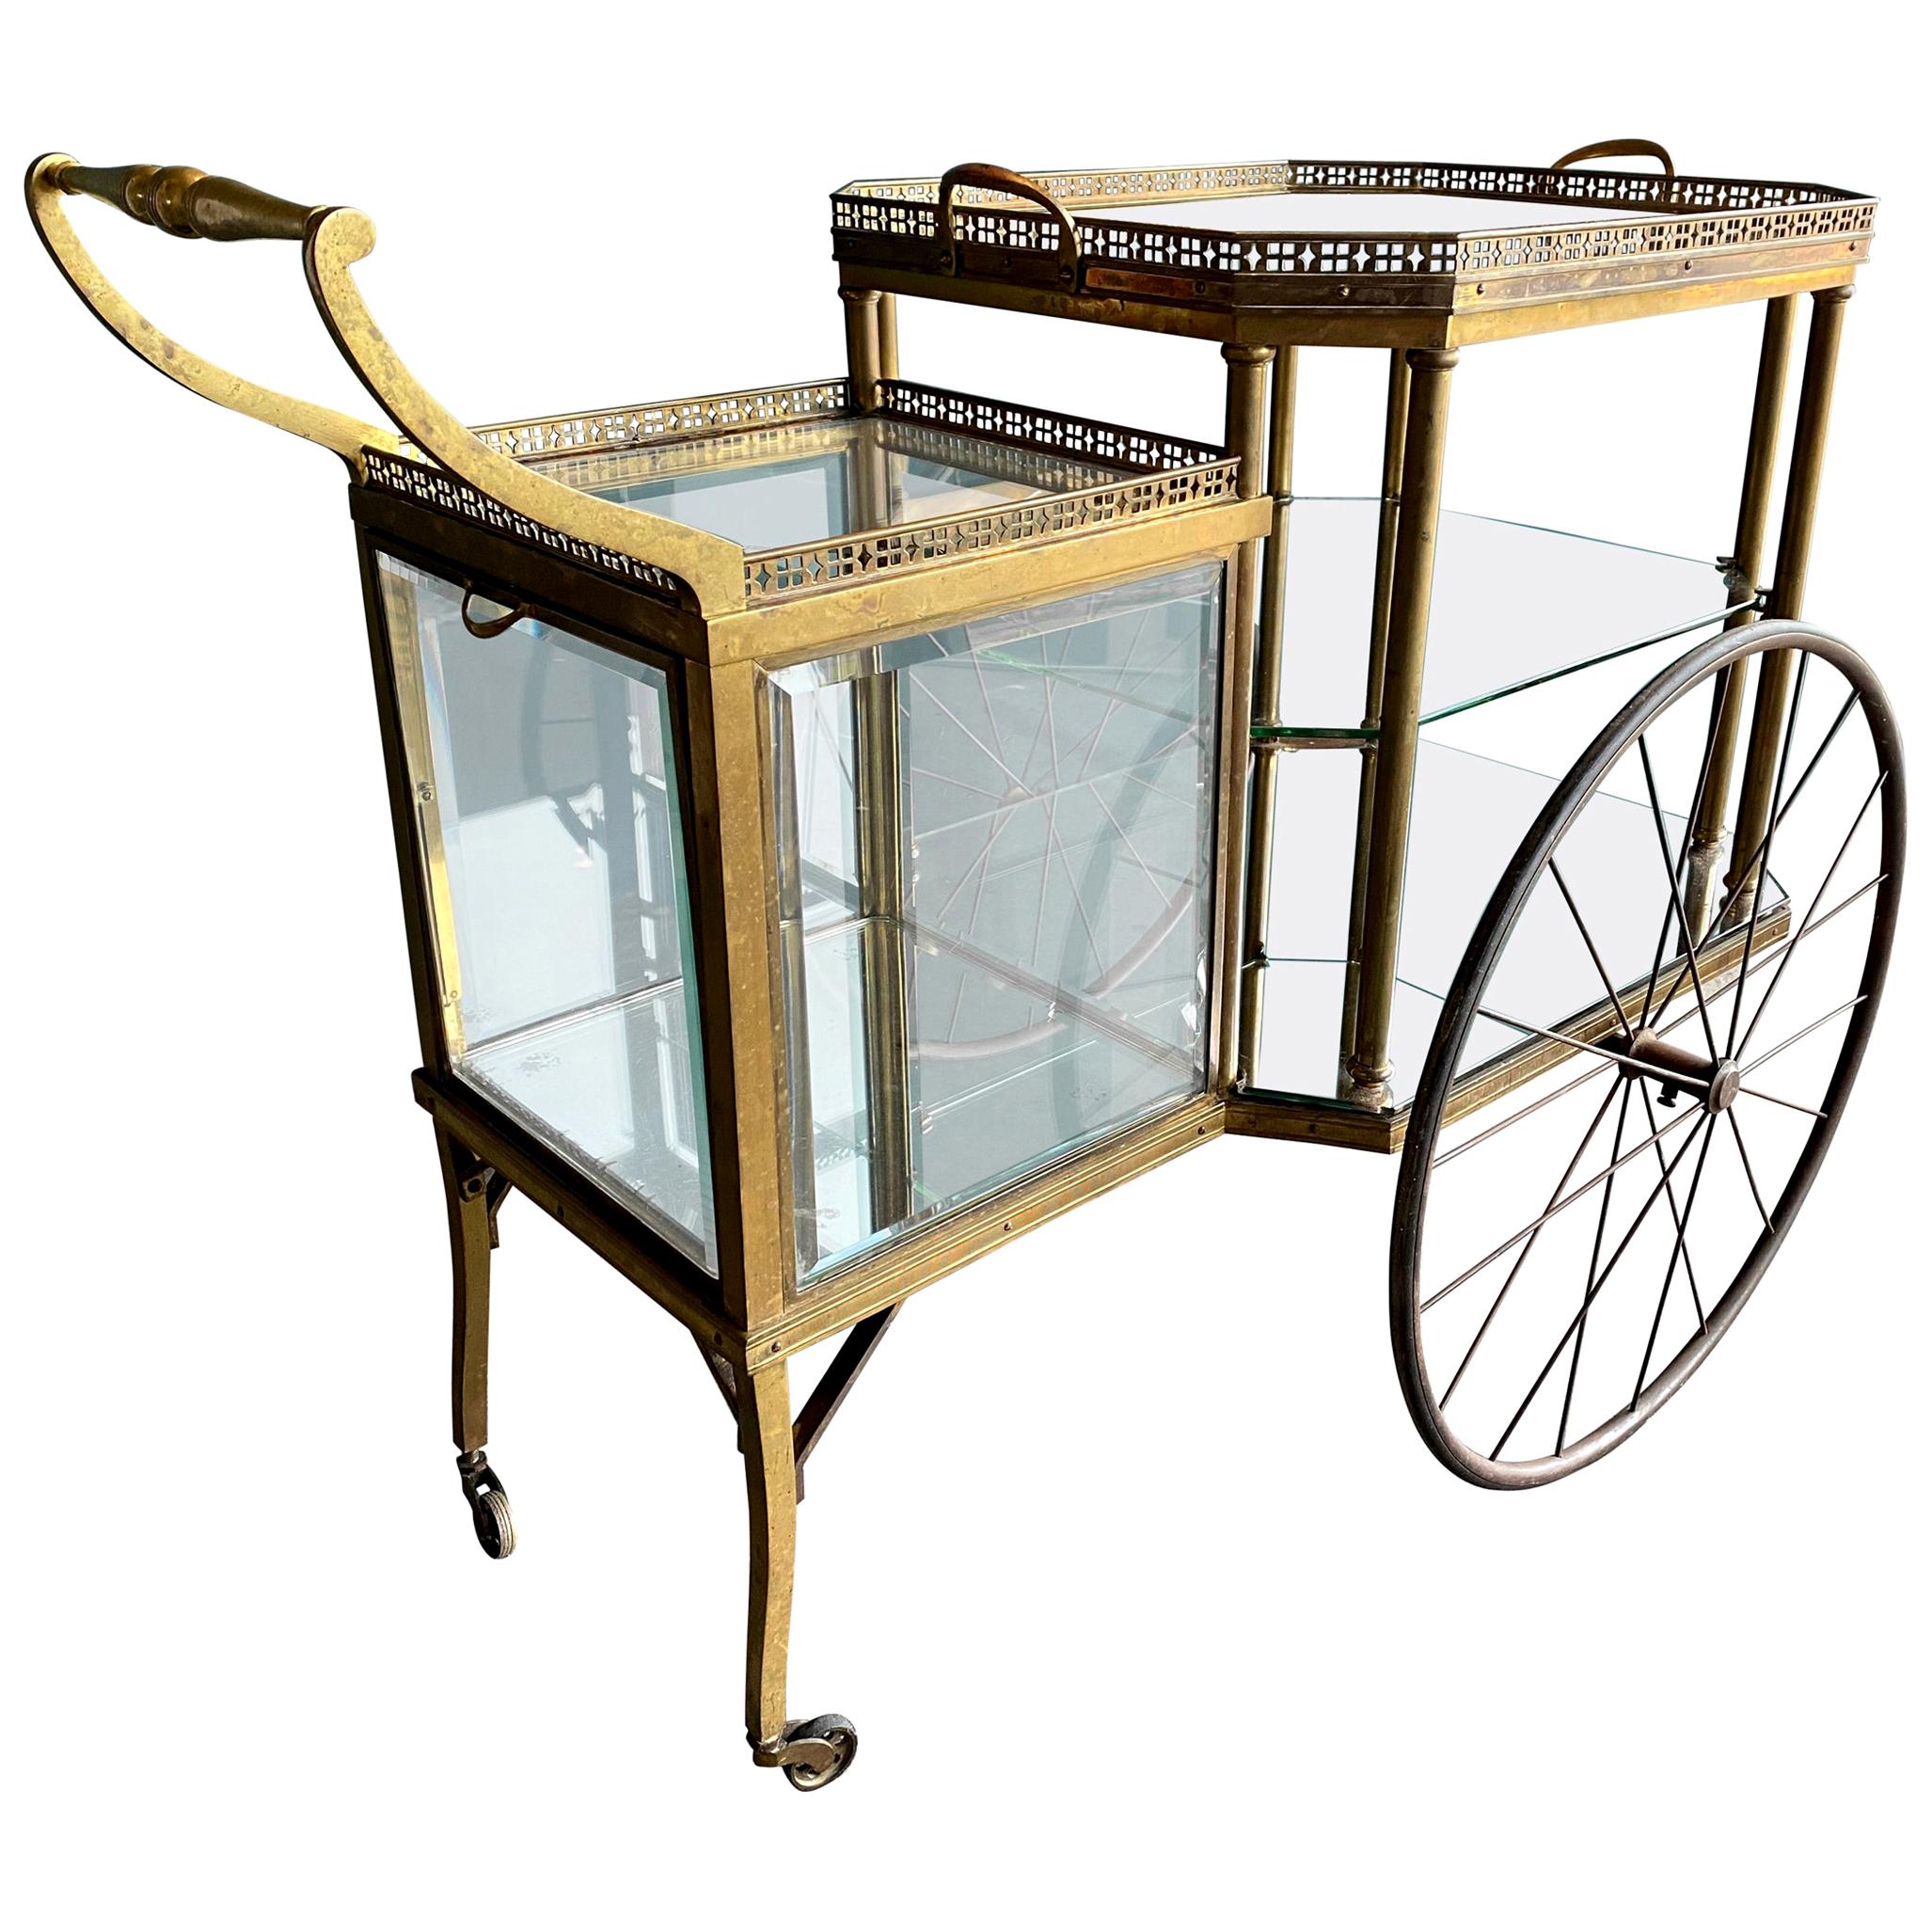 Antique Brass Bar Carriage/ Tea Trolley/ Table Trolley, Glass Case from a Castle